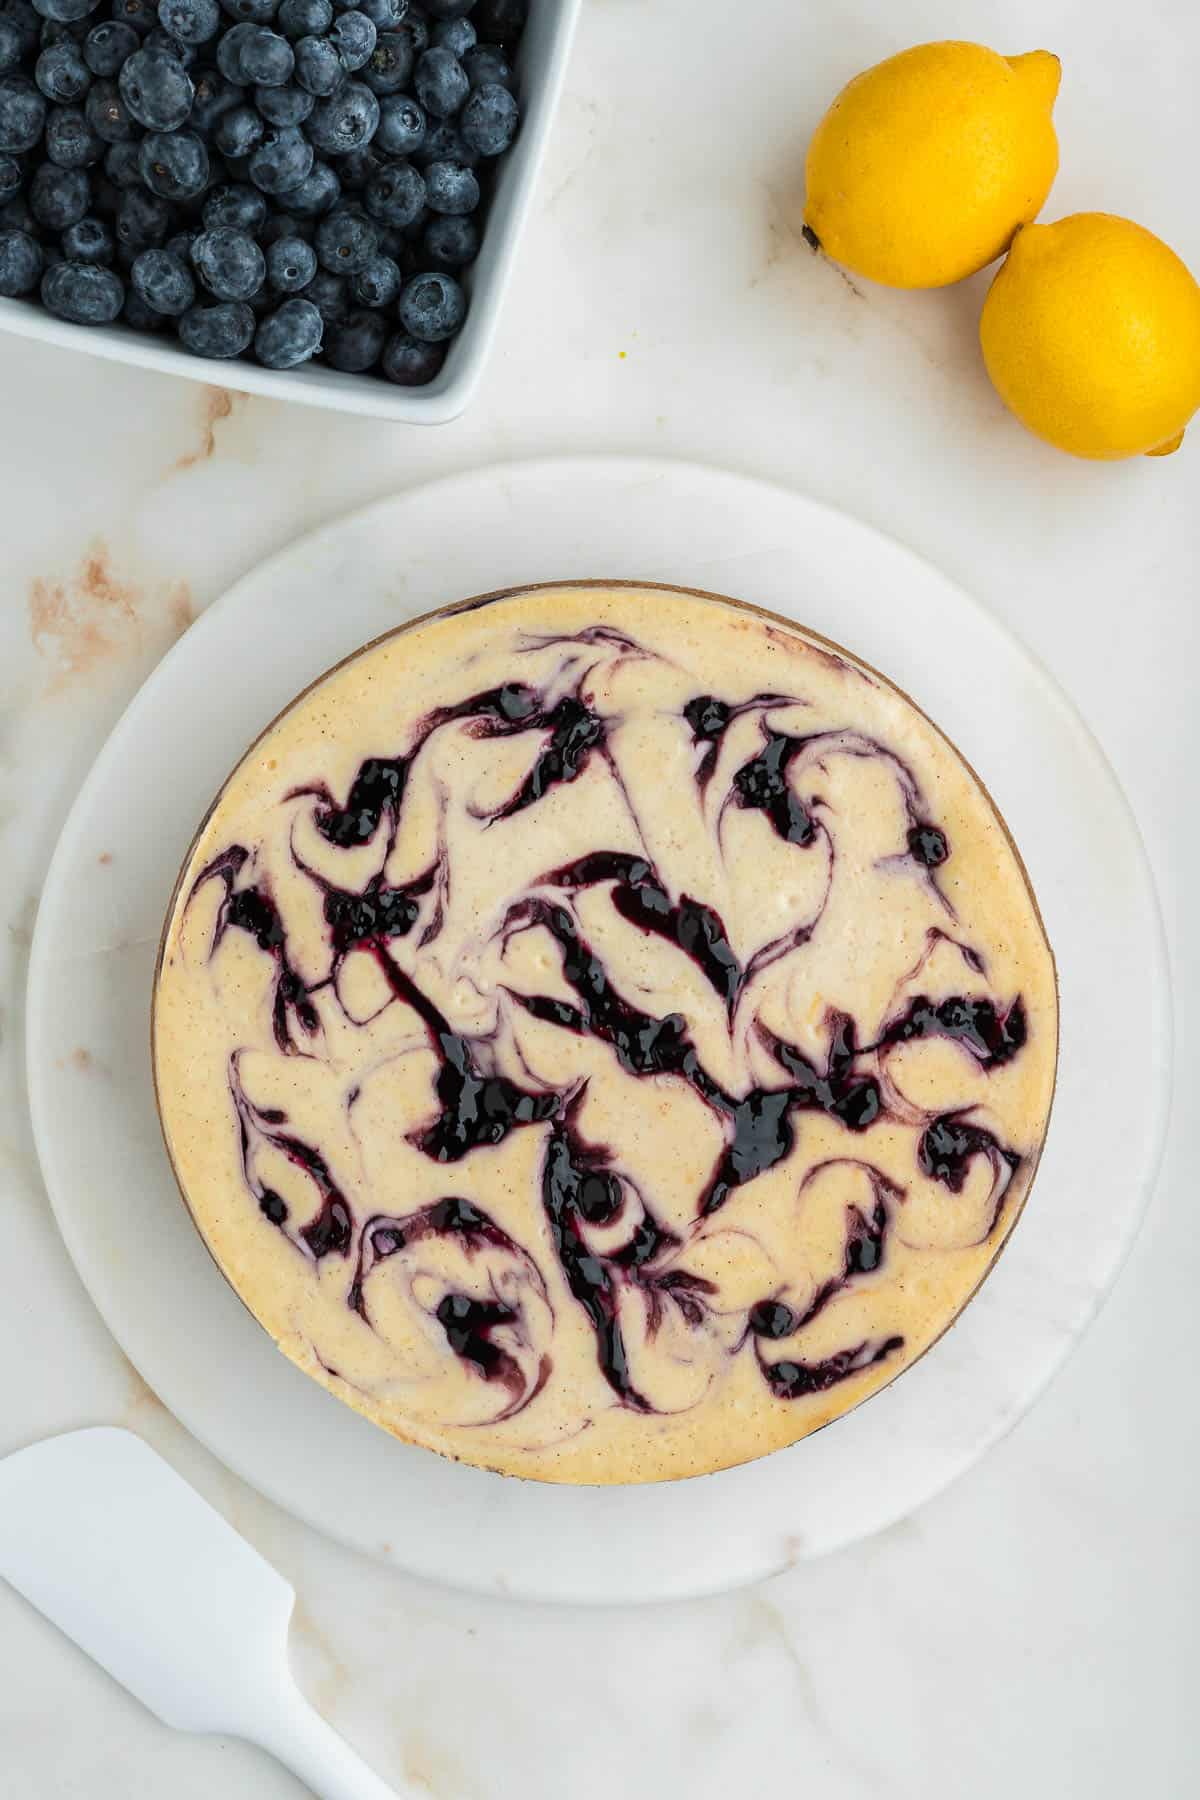 Lemon cheesecake with blueberry marbled through.